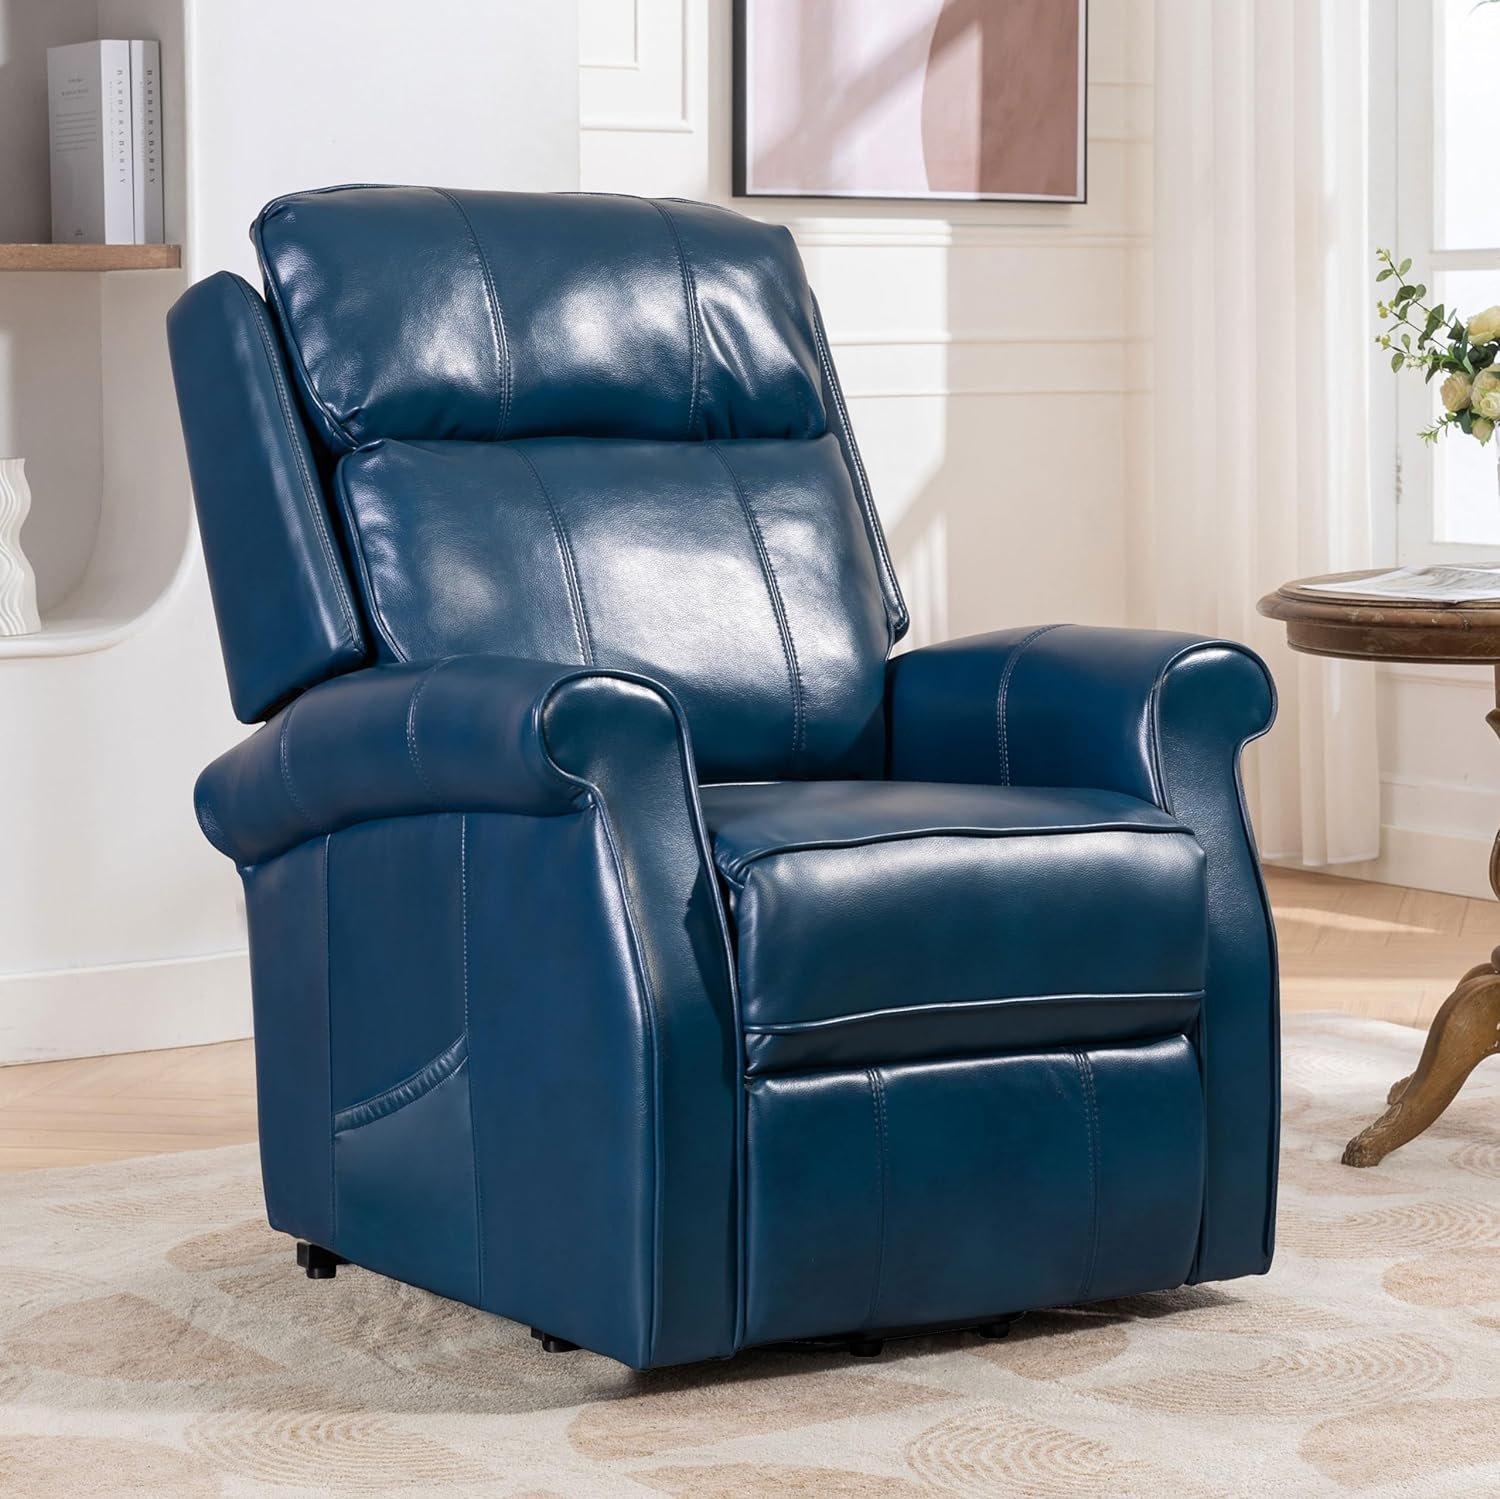 Lehboson Lift Chair Recliners, Electric Power Lift Chairs Recliners for Elderly with Massage,Faux Leather Lazy Recliner for Living Room,3 Positions,USB Ports and Side Pocket (Navy Blue)